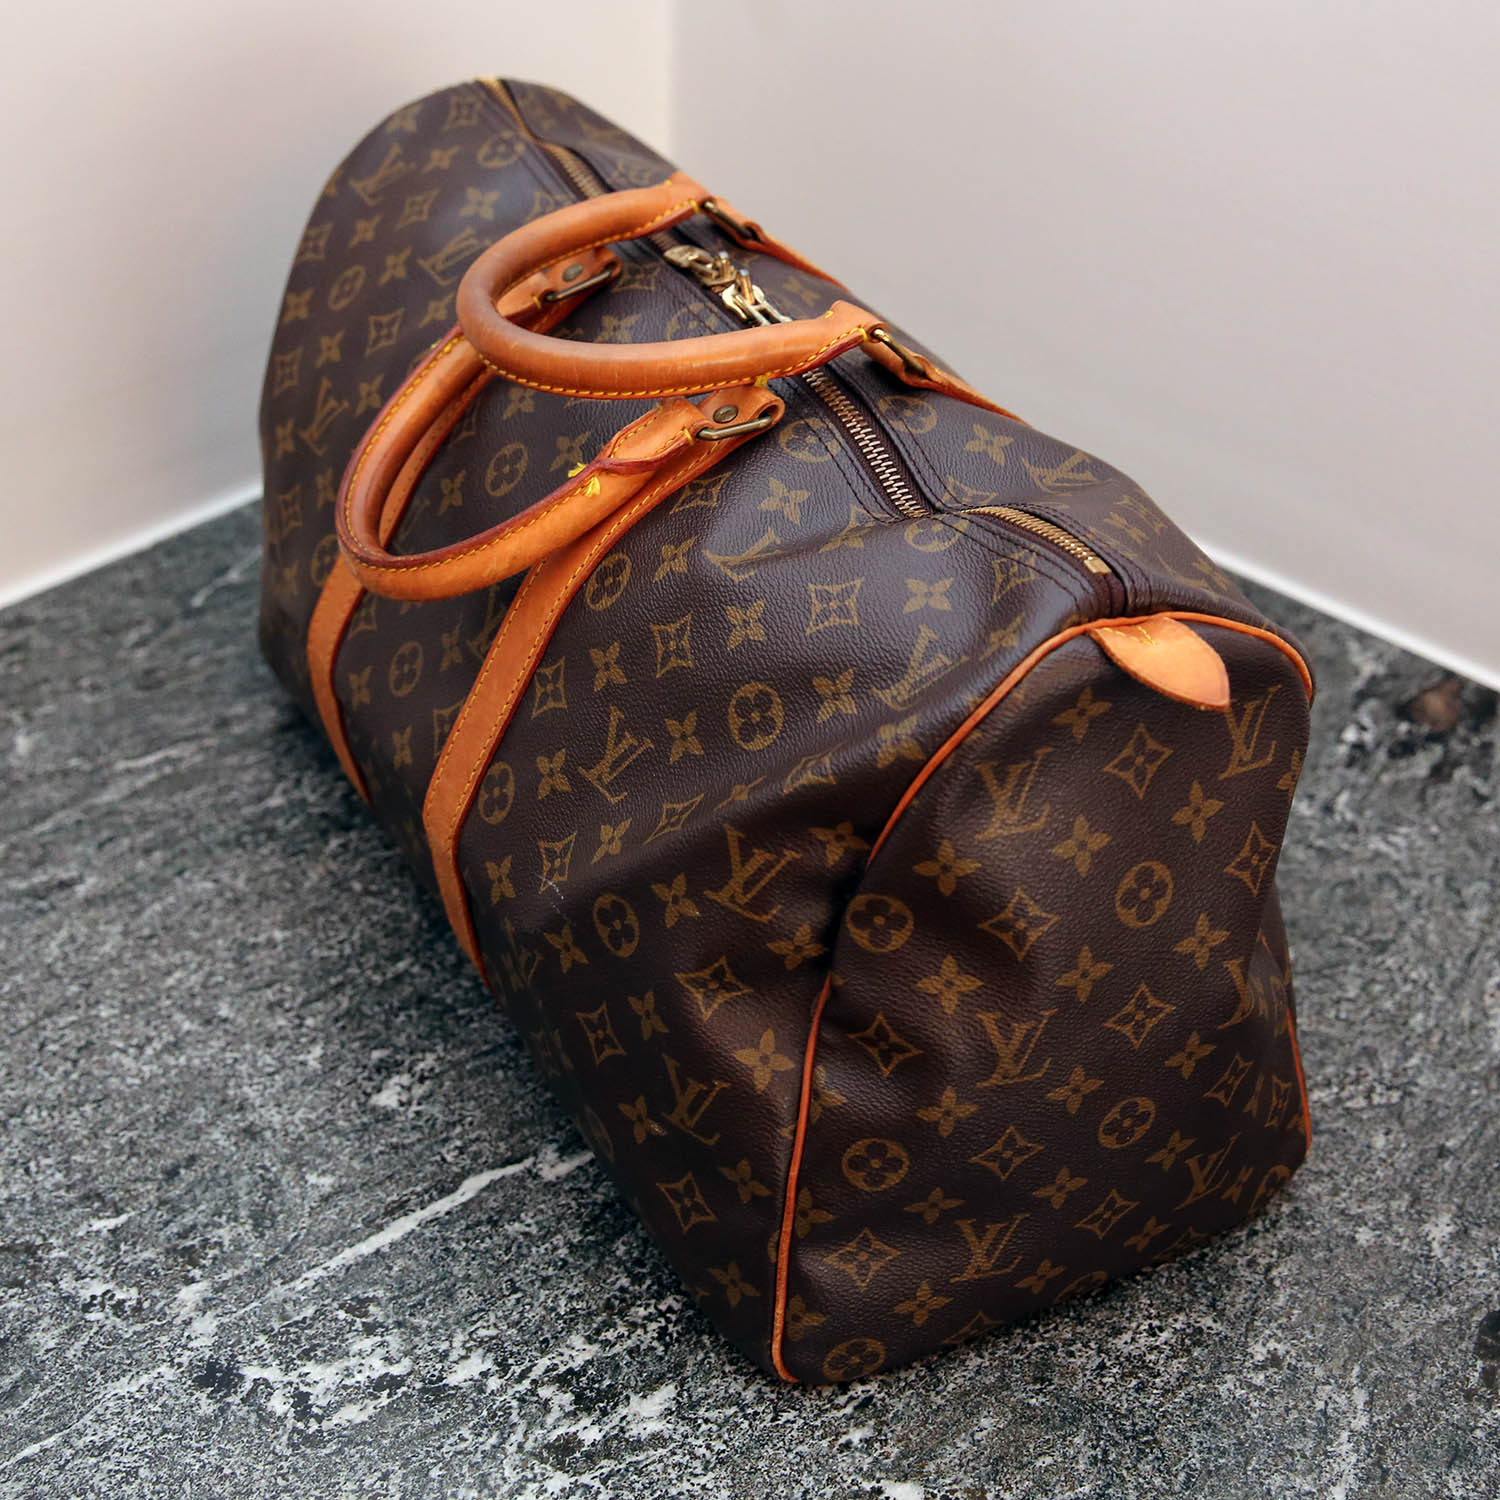 Louis Vuitton Keepall 45 - 0 - Pre-owned Louis Vuitton and other luxury brands